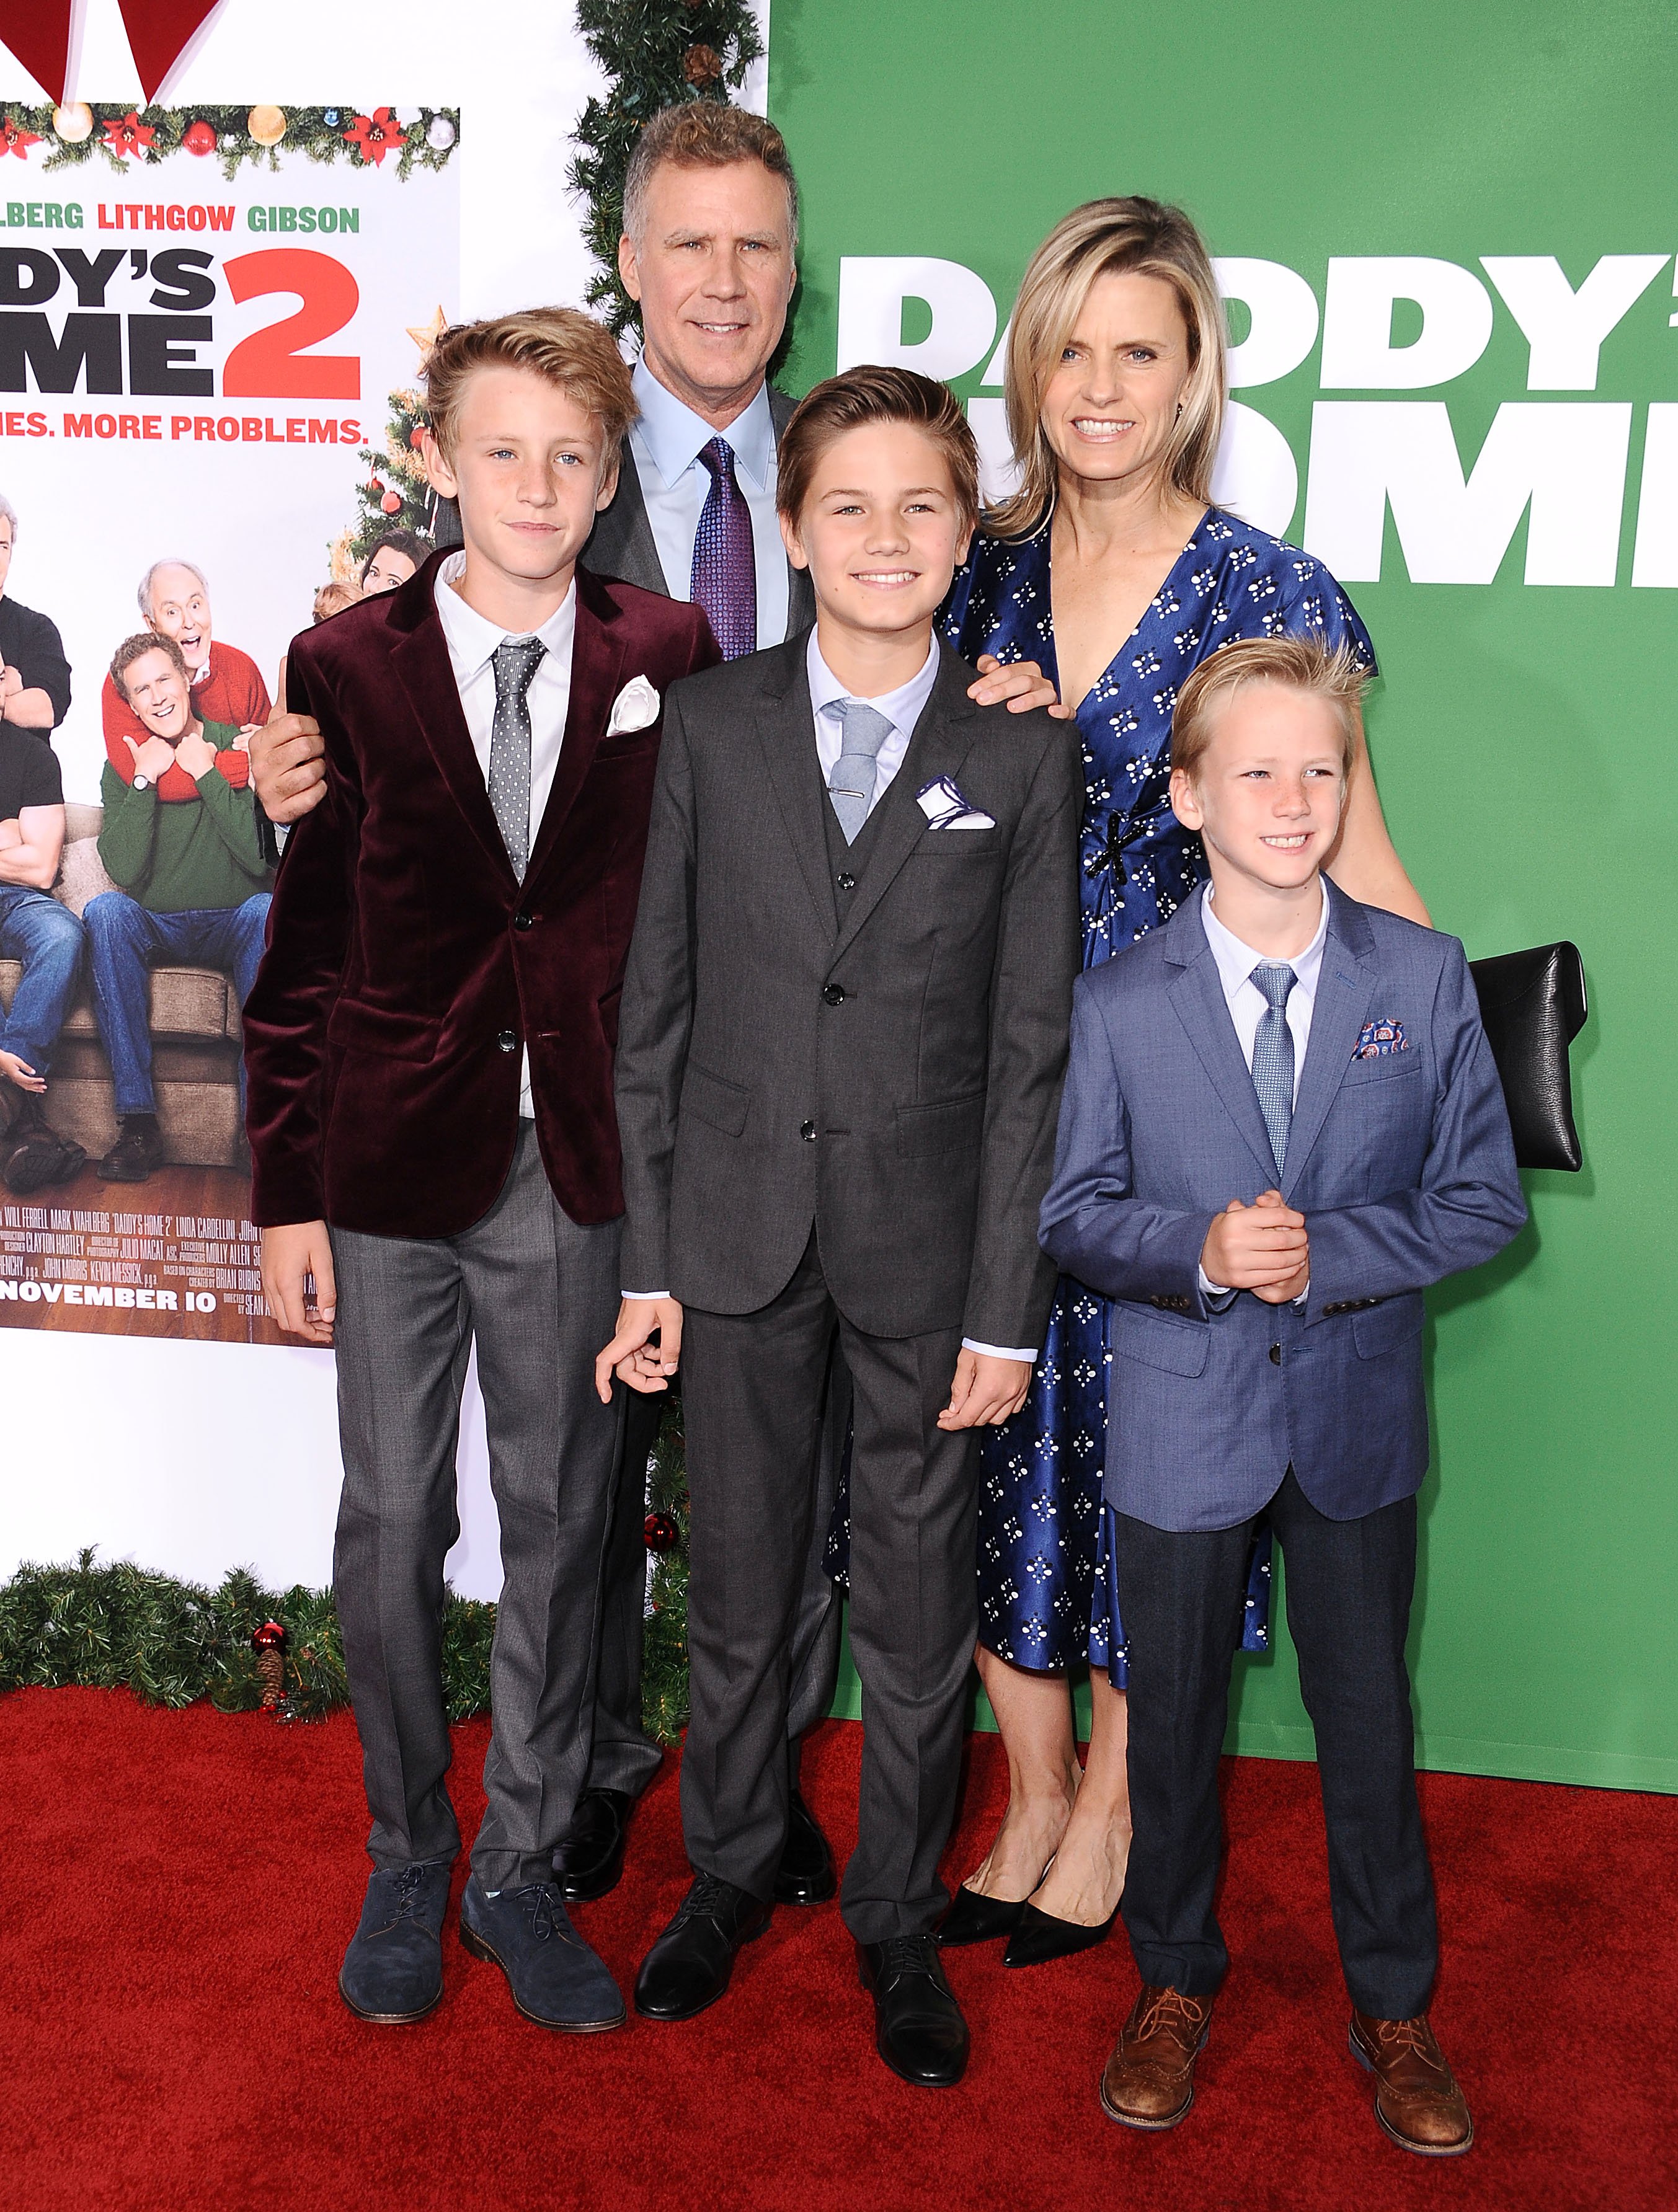 Will Ferrell, Viveca Paulin and their children Magnus Paulin Ferrell, Mattias Paulin Ferrell and Axel Paulin Ferrell during the premiere of "Daddy's Home 2" at Regency Village Theatre on November 5, 2017 in Westwood, California. | Source: Getty Images